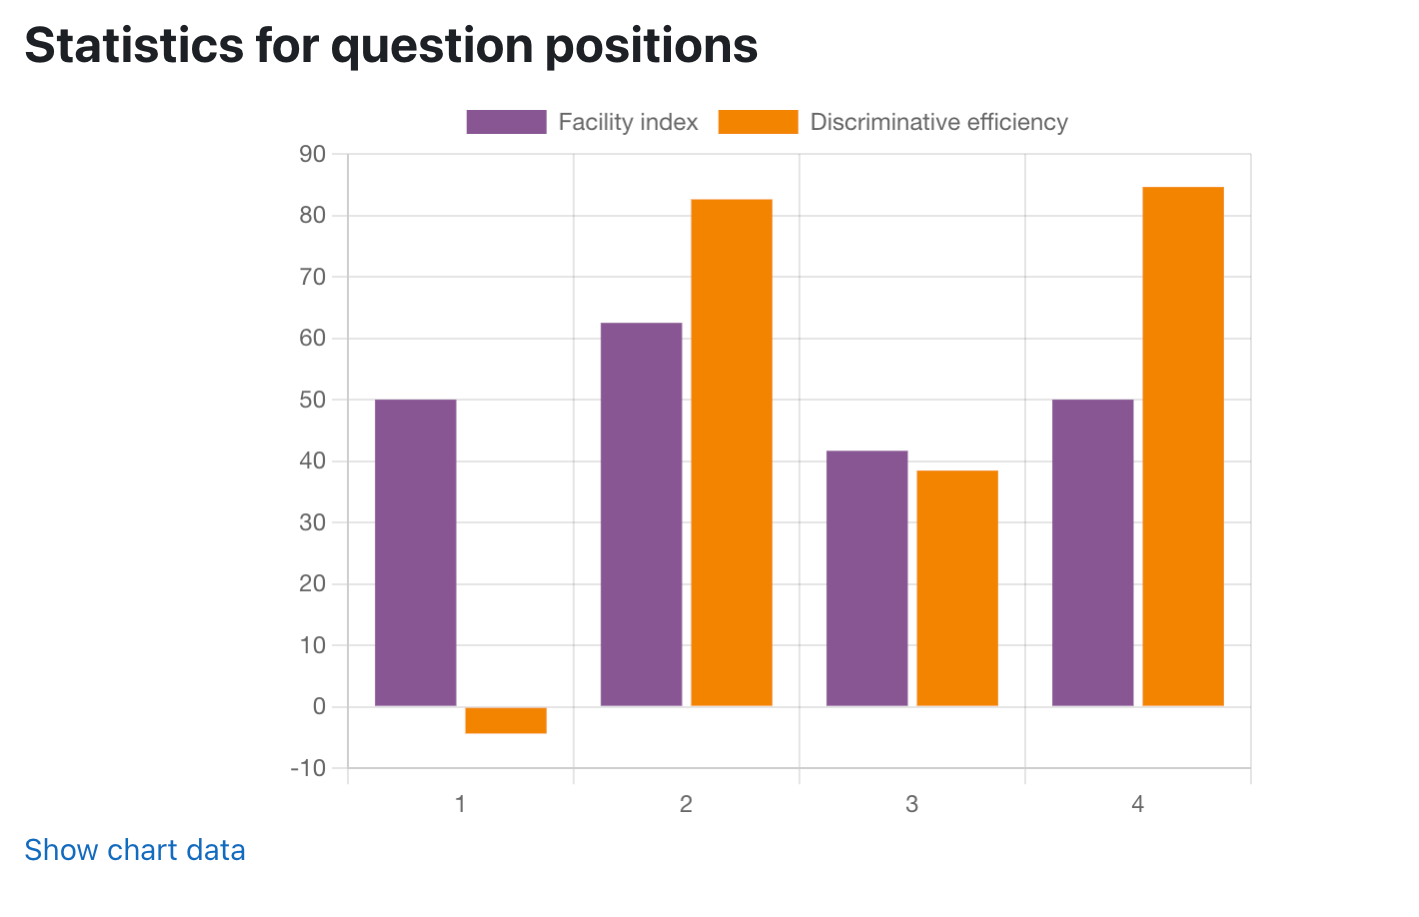 Screenshot of the statistics for questions positions displayed as chart